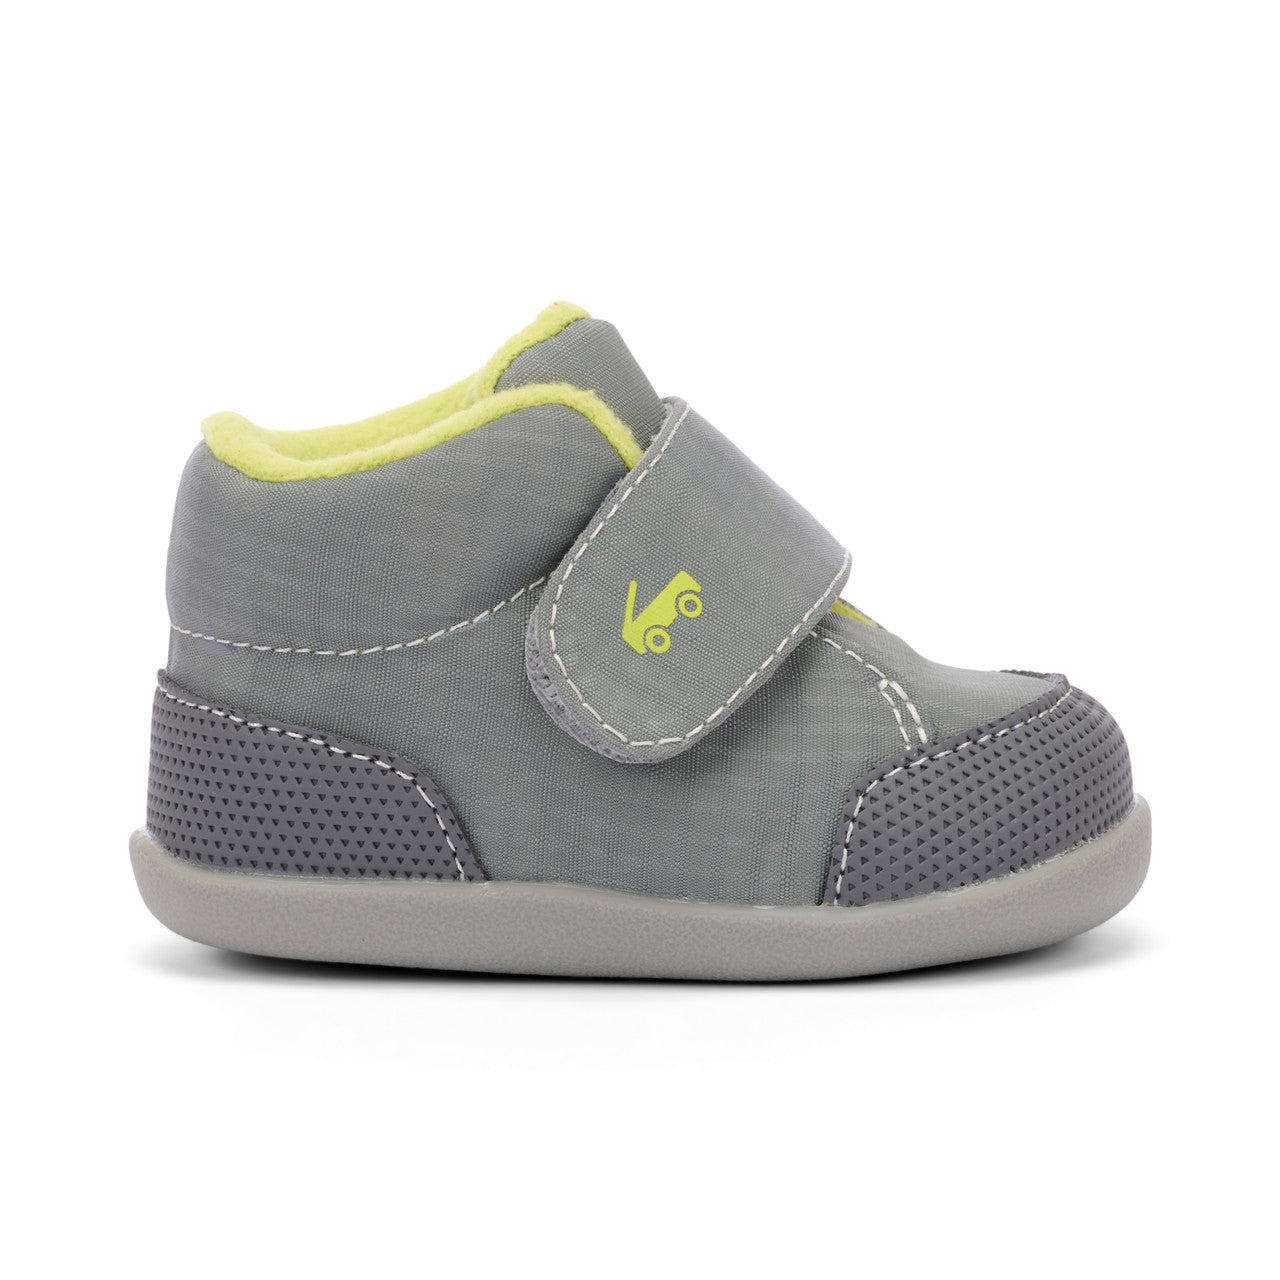 Casey (First Walker) Infant Bootie -  Gray/Lime